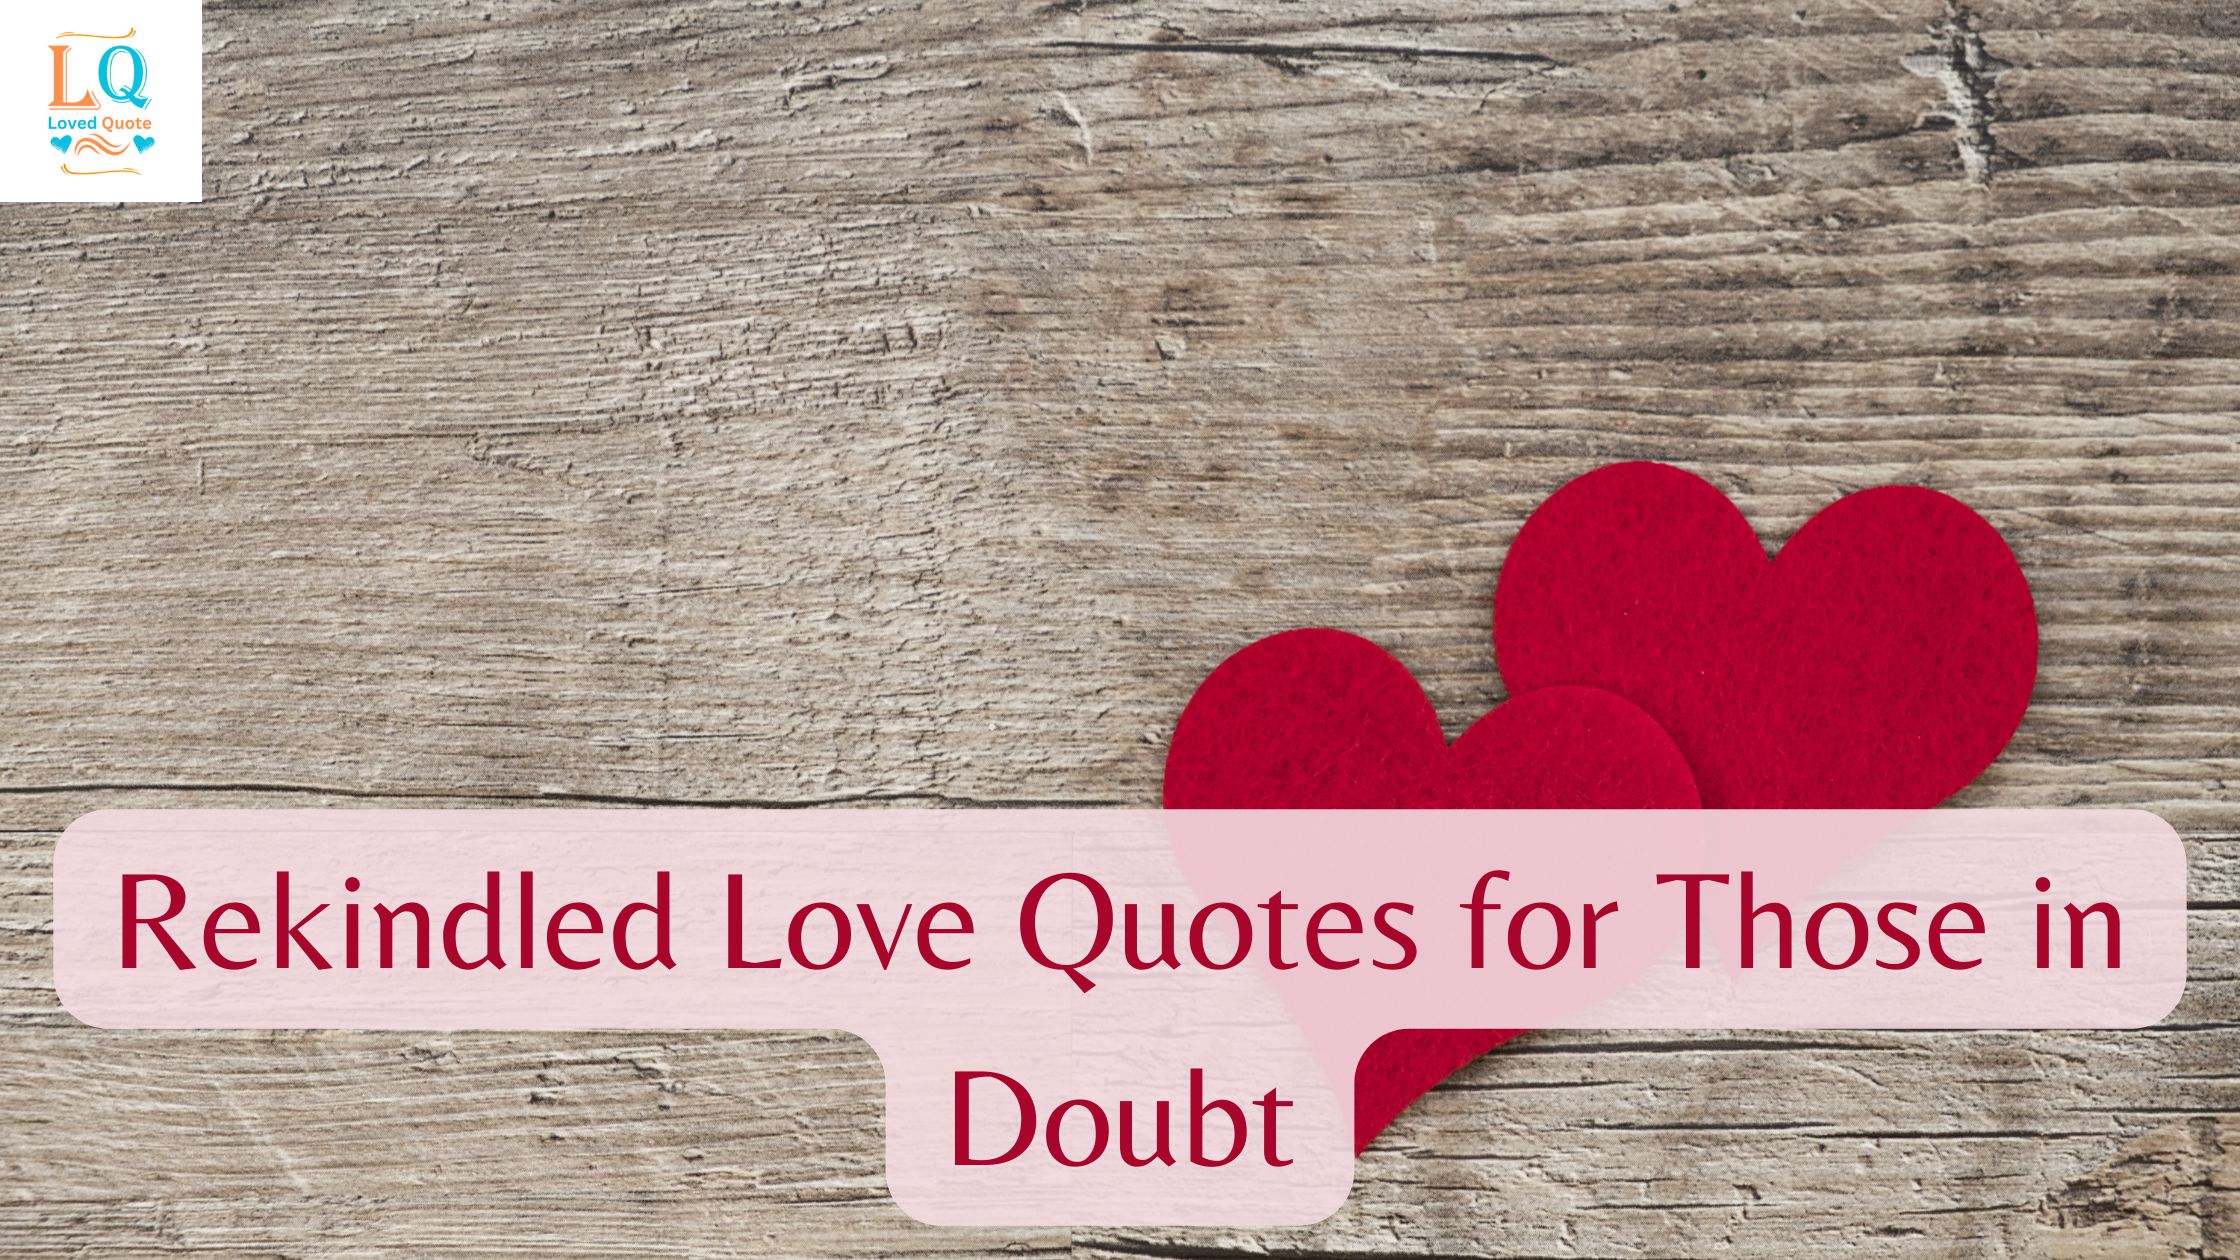 Rekindled Love Quotes for Those in Doubt